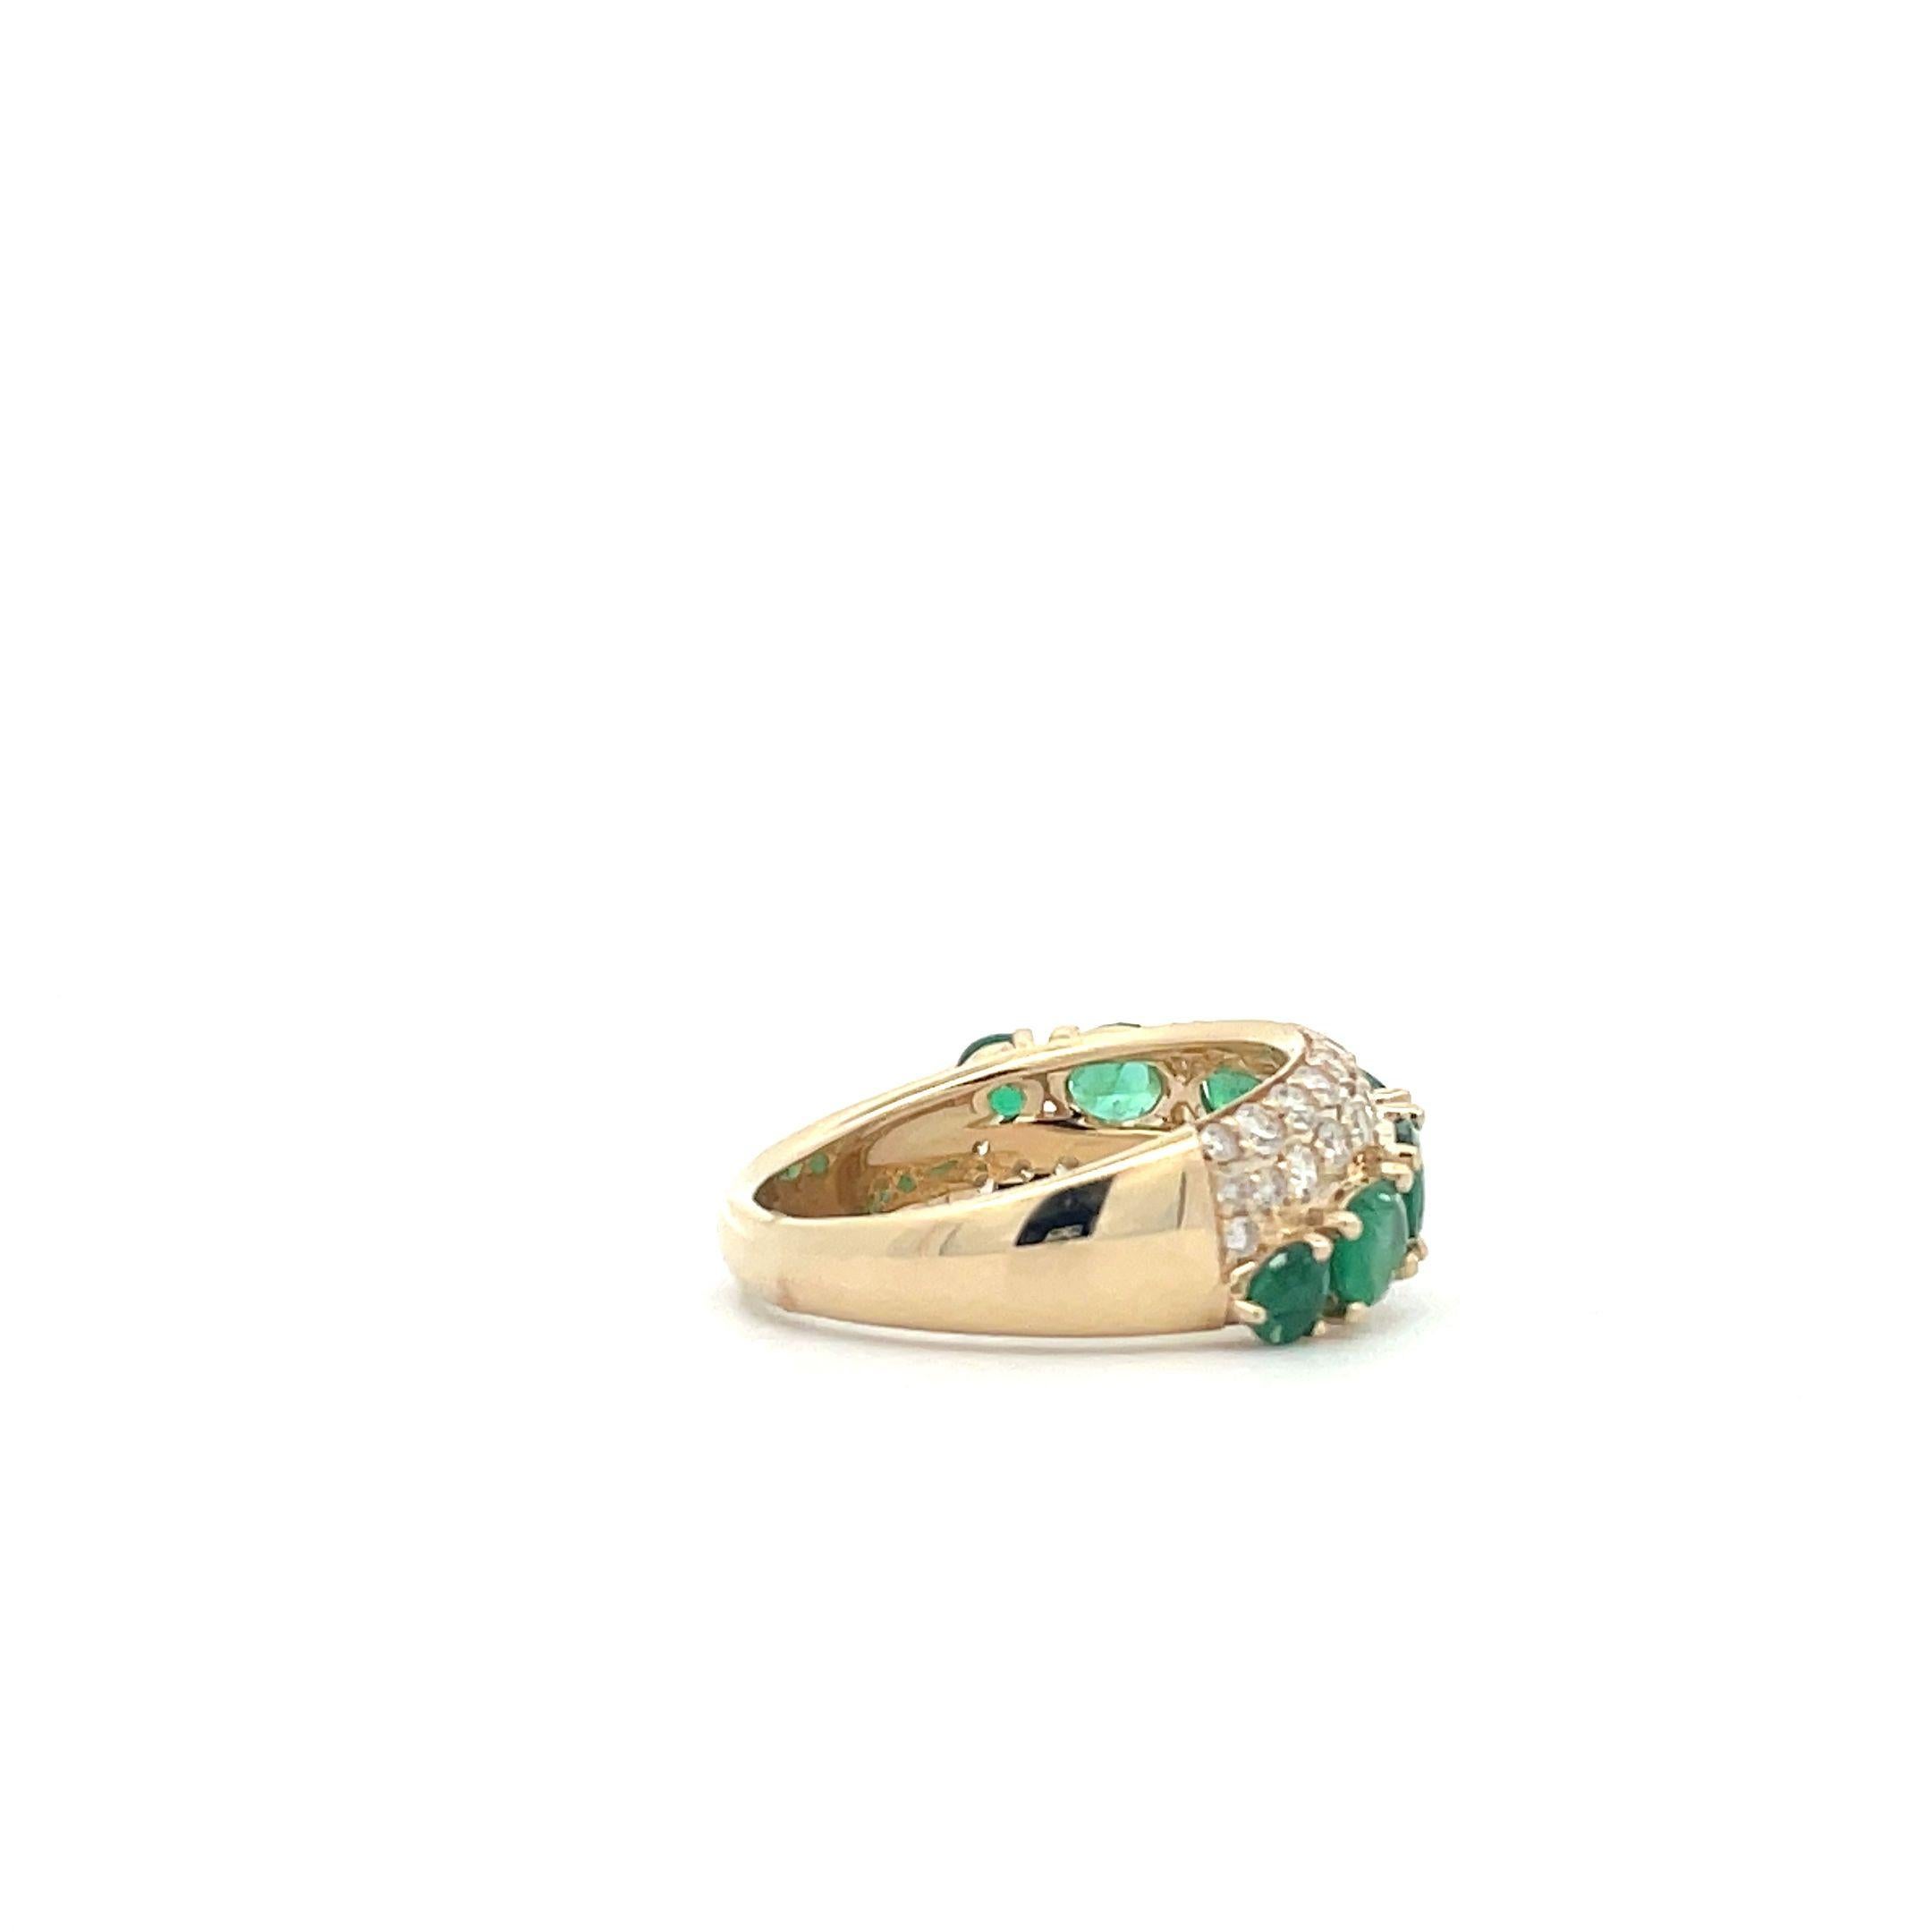 Oval Cut 1.61 Ct. 5 Oval, Cut Emeralds and Diamond Cluster Cocktail Ring in 14K Gold